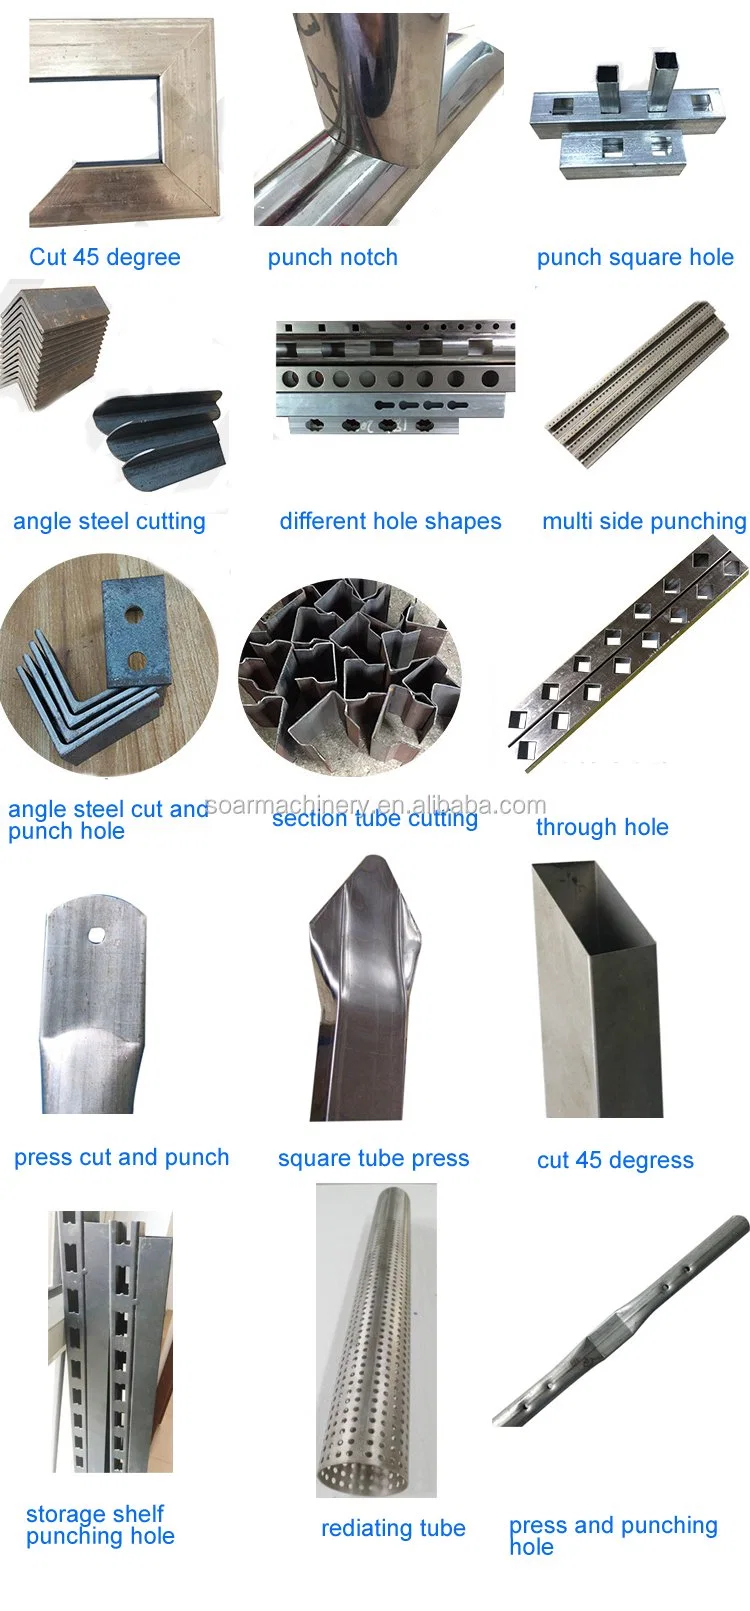 Hydraulic Punching Machines Stainless Steel Pipe Hole Punching Single-Head Punch Presses